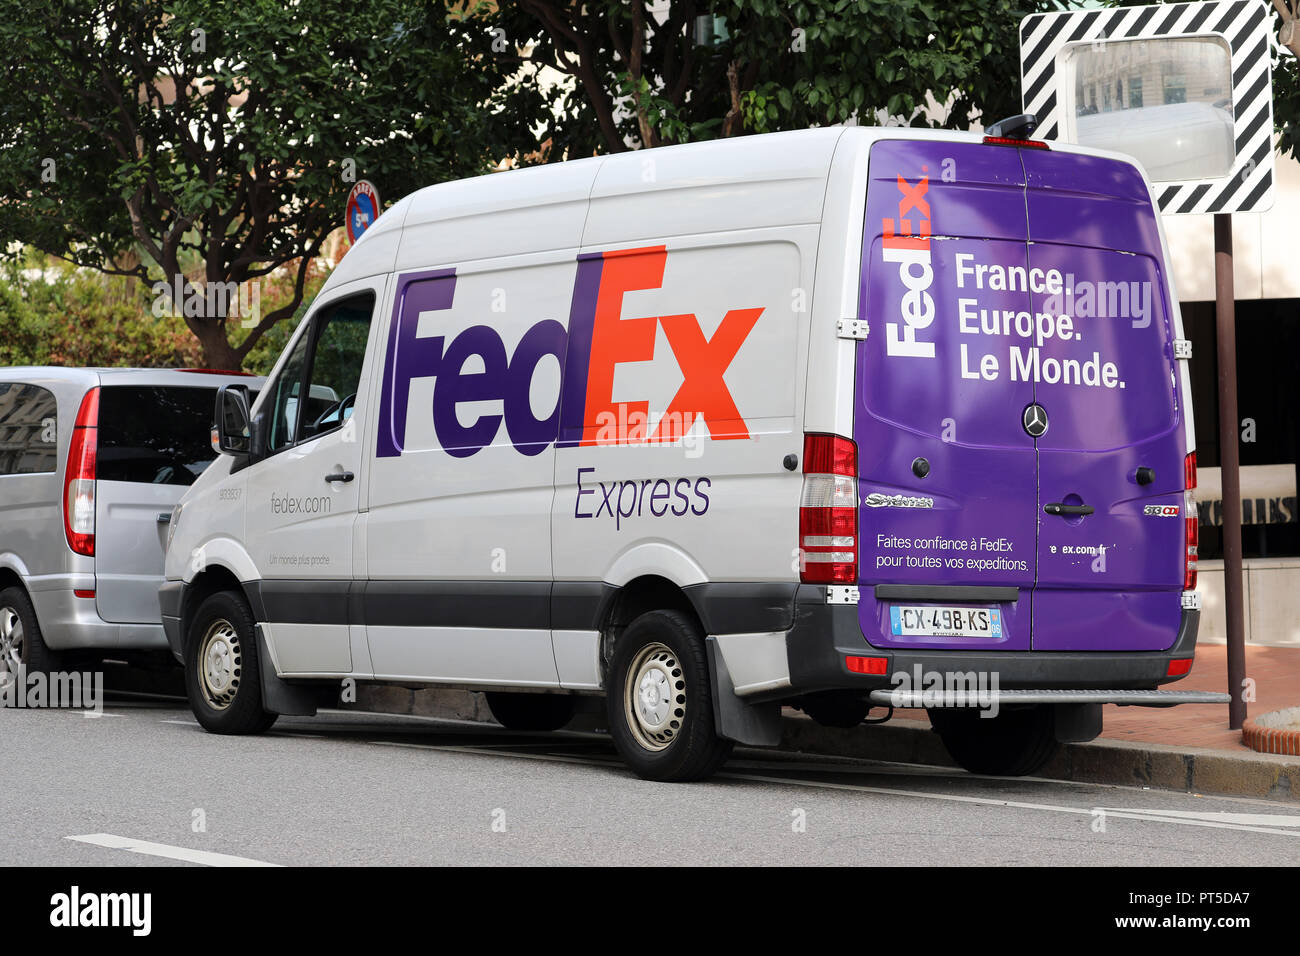 Monte-Carlo, Monaco - October 5 2018 : FedEx Delivery Truck (Van) Parked On The Street In Monaco. FedEx Corporation Is An American Multinational Couri Stock Photo